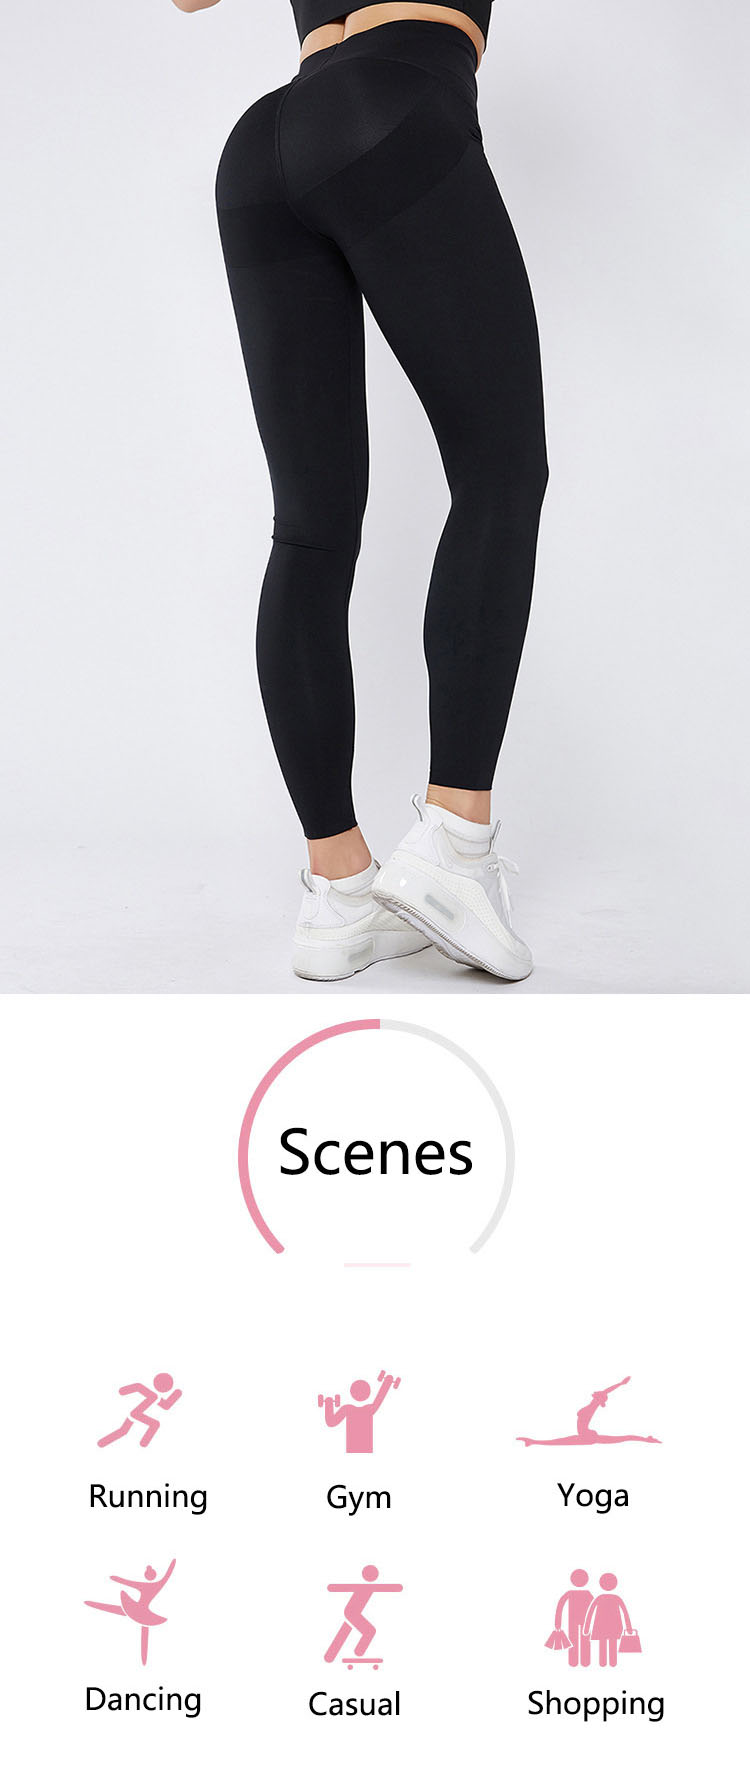 The combination stitching of rhomboid and angular shape brings new ideas to ladies workout pants